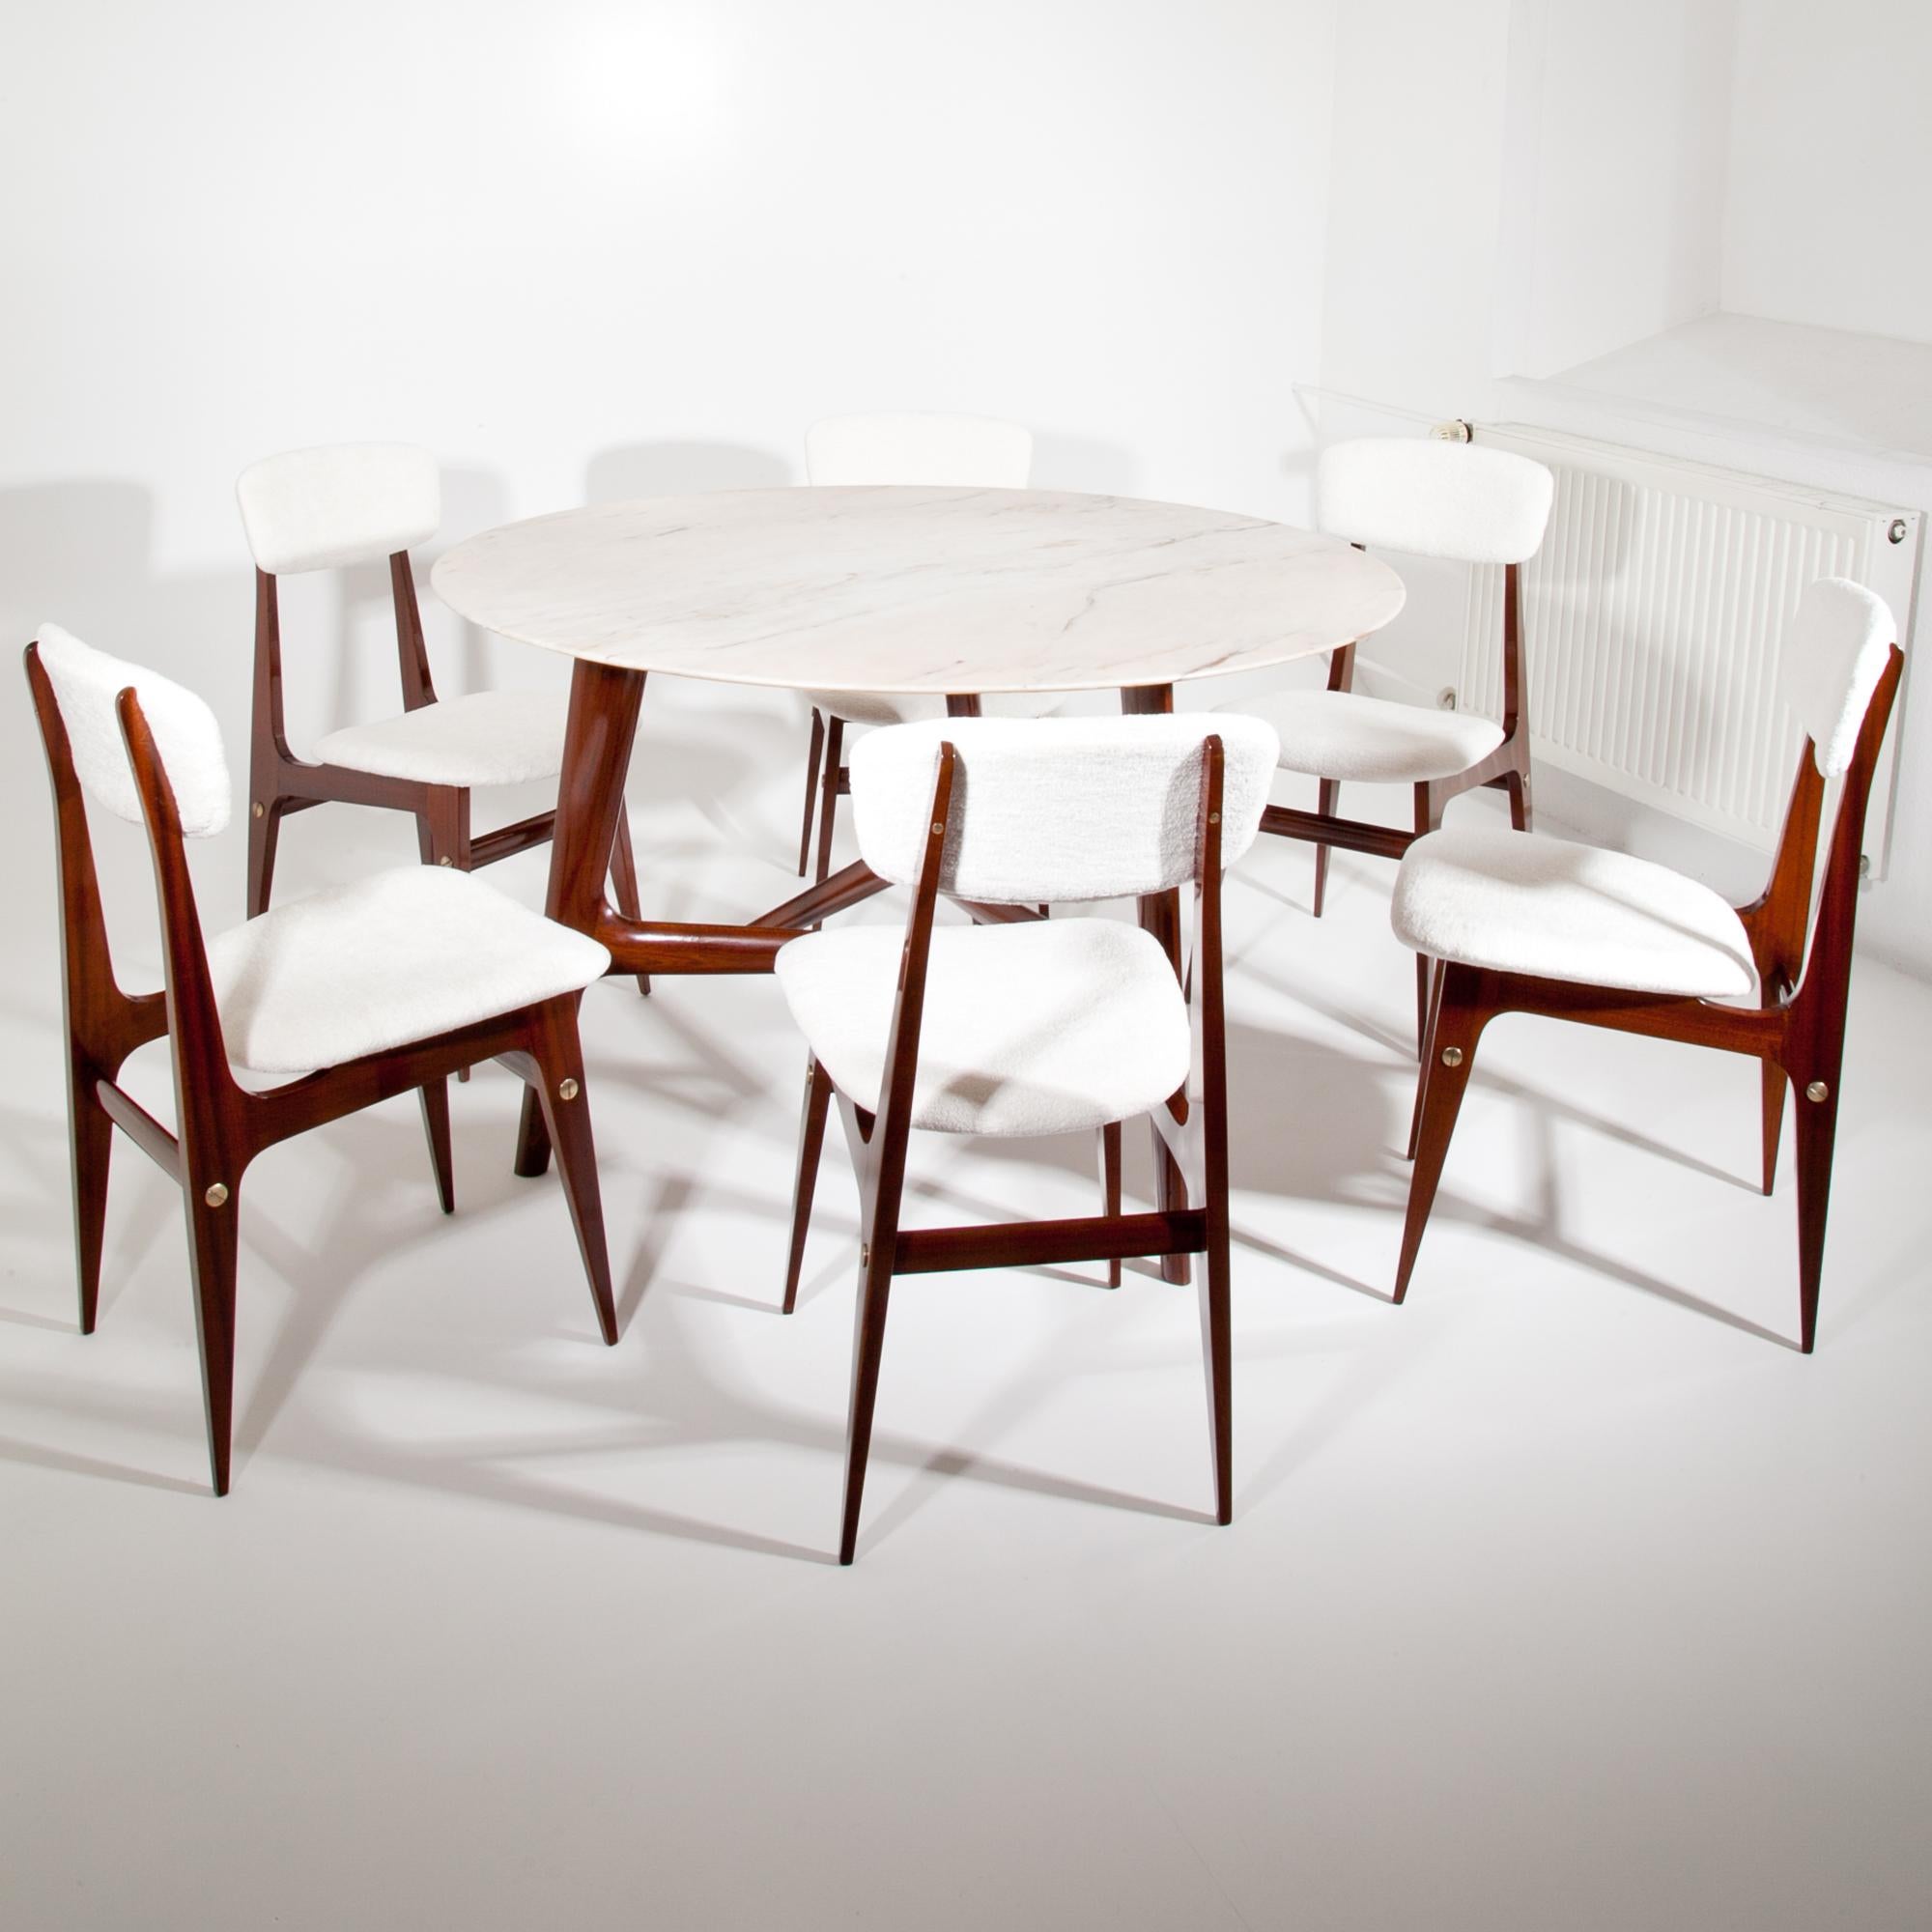 Onyx Dining Group, Attributed to Ico Parisi, Italy, Mid-20th Century